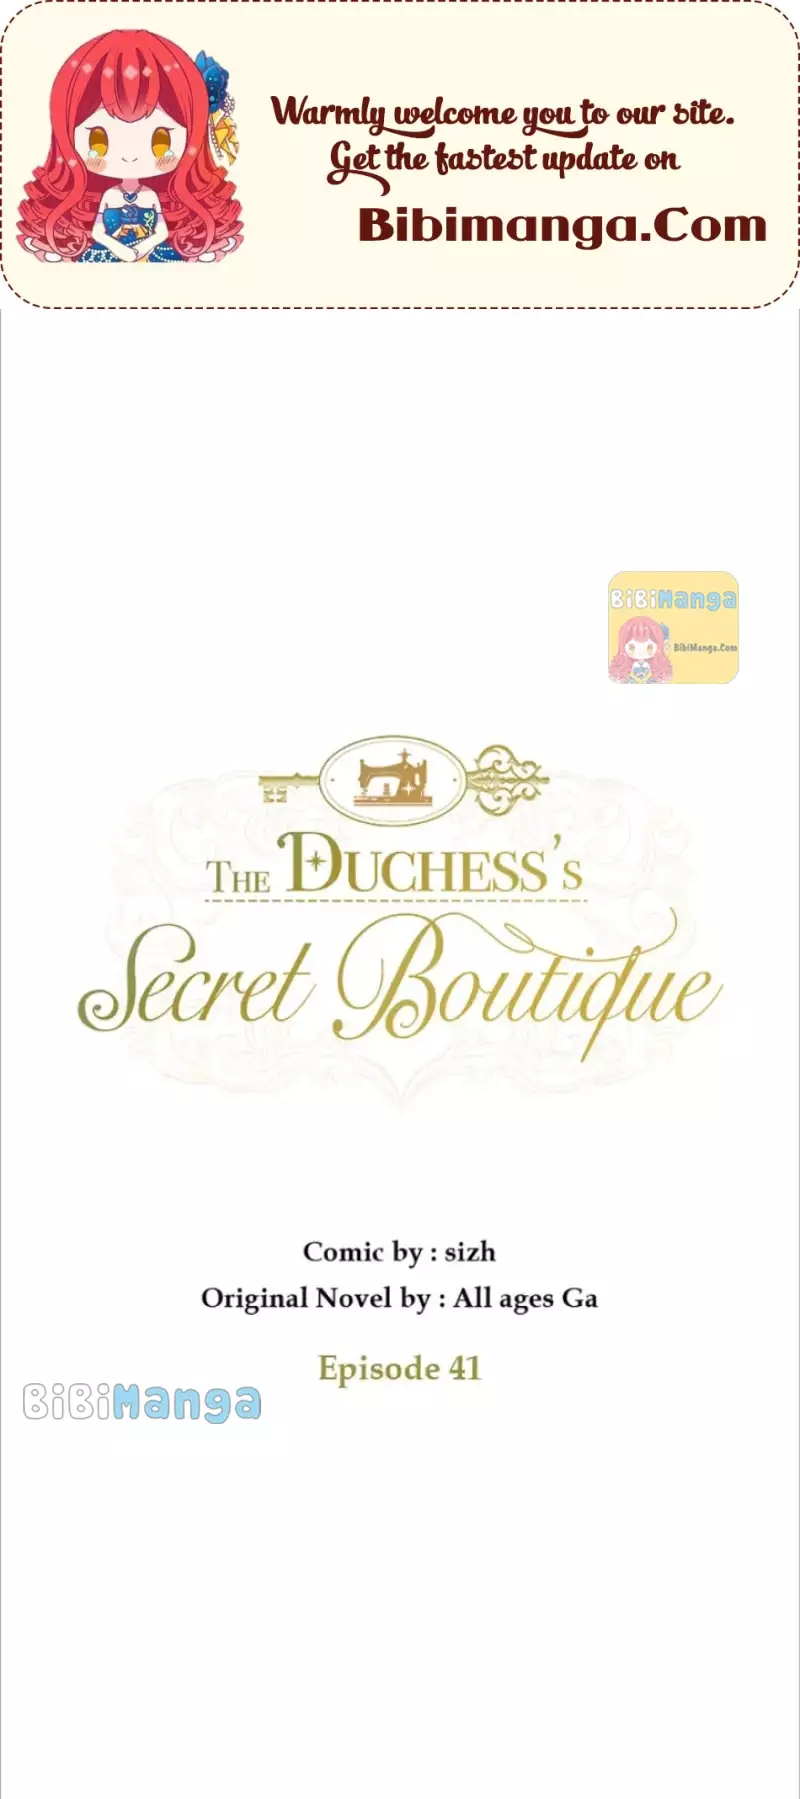 The Duchess’S Secret Dressing Room - 41 page 2-6aab67fb